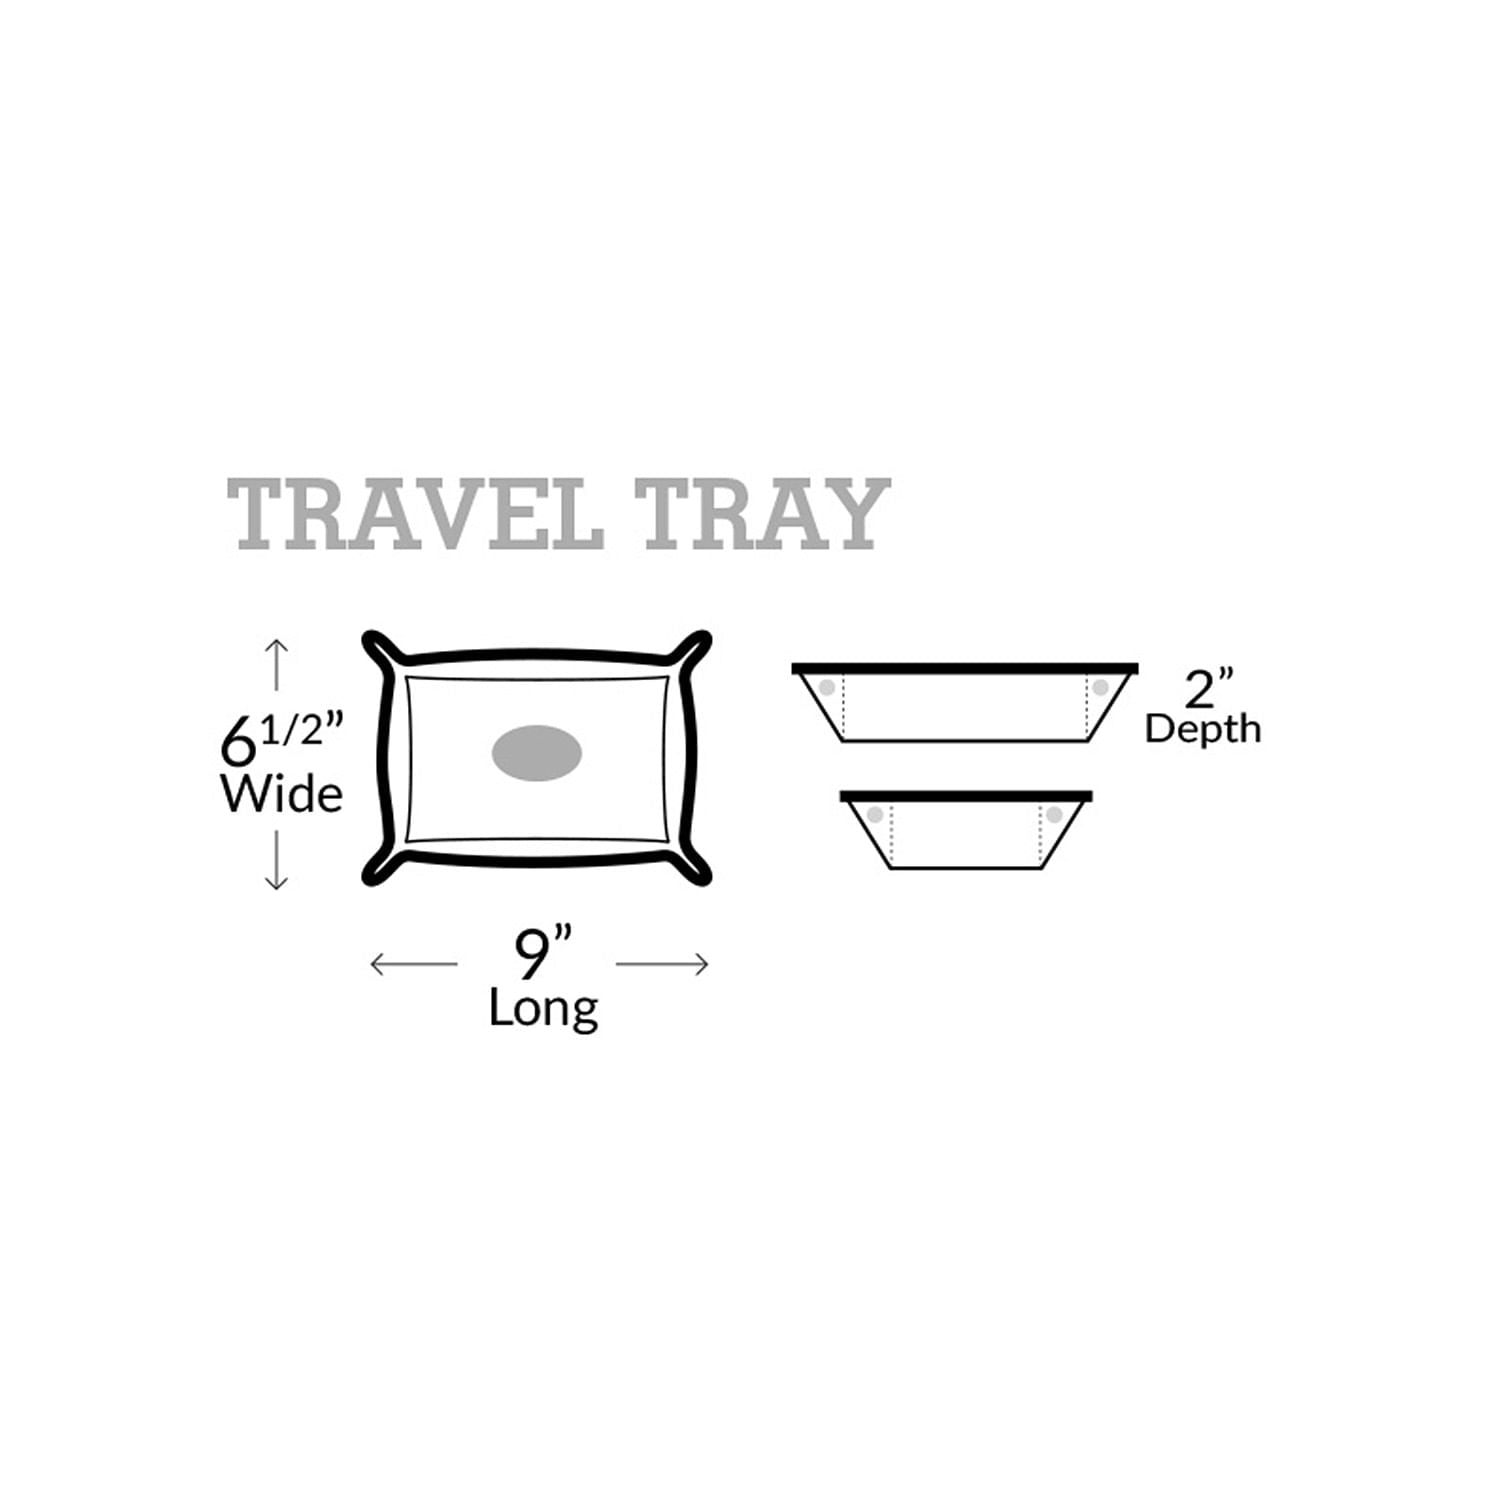 Travel Tray measurements 6.5 inches wide x 9 inches long x 2 inches depth